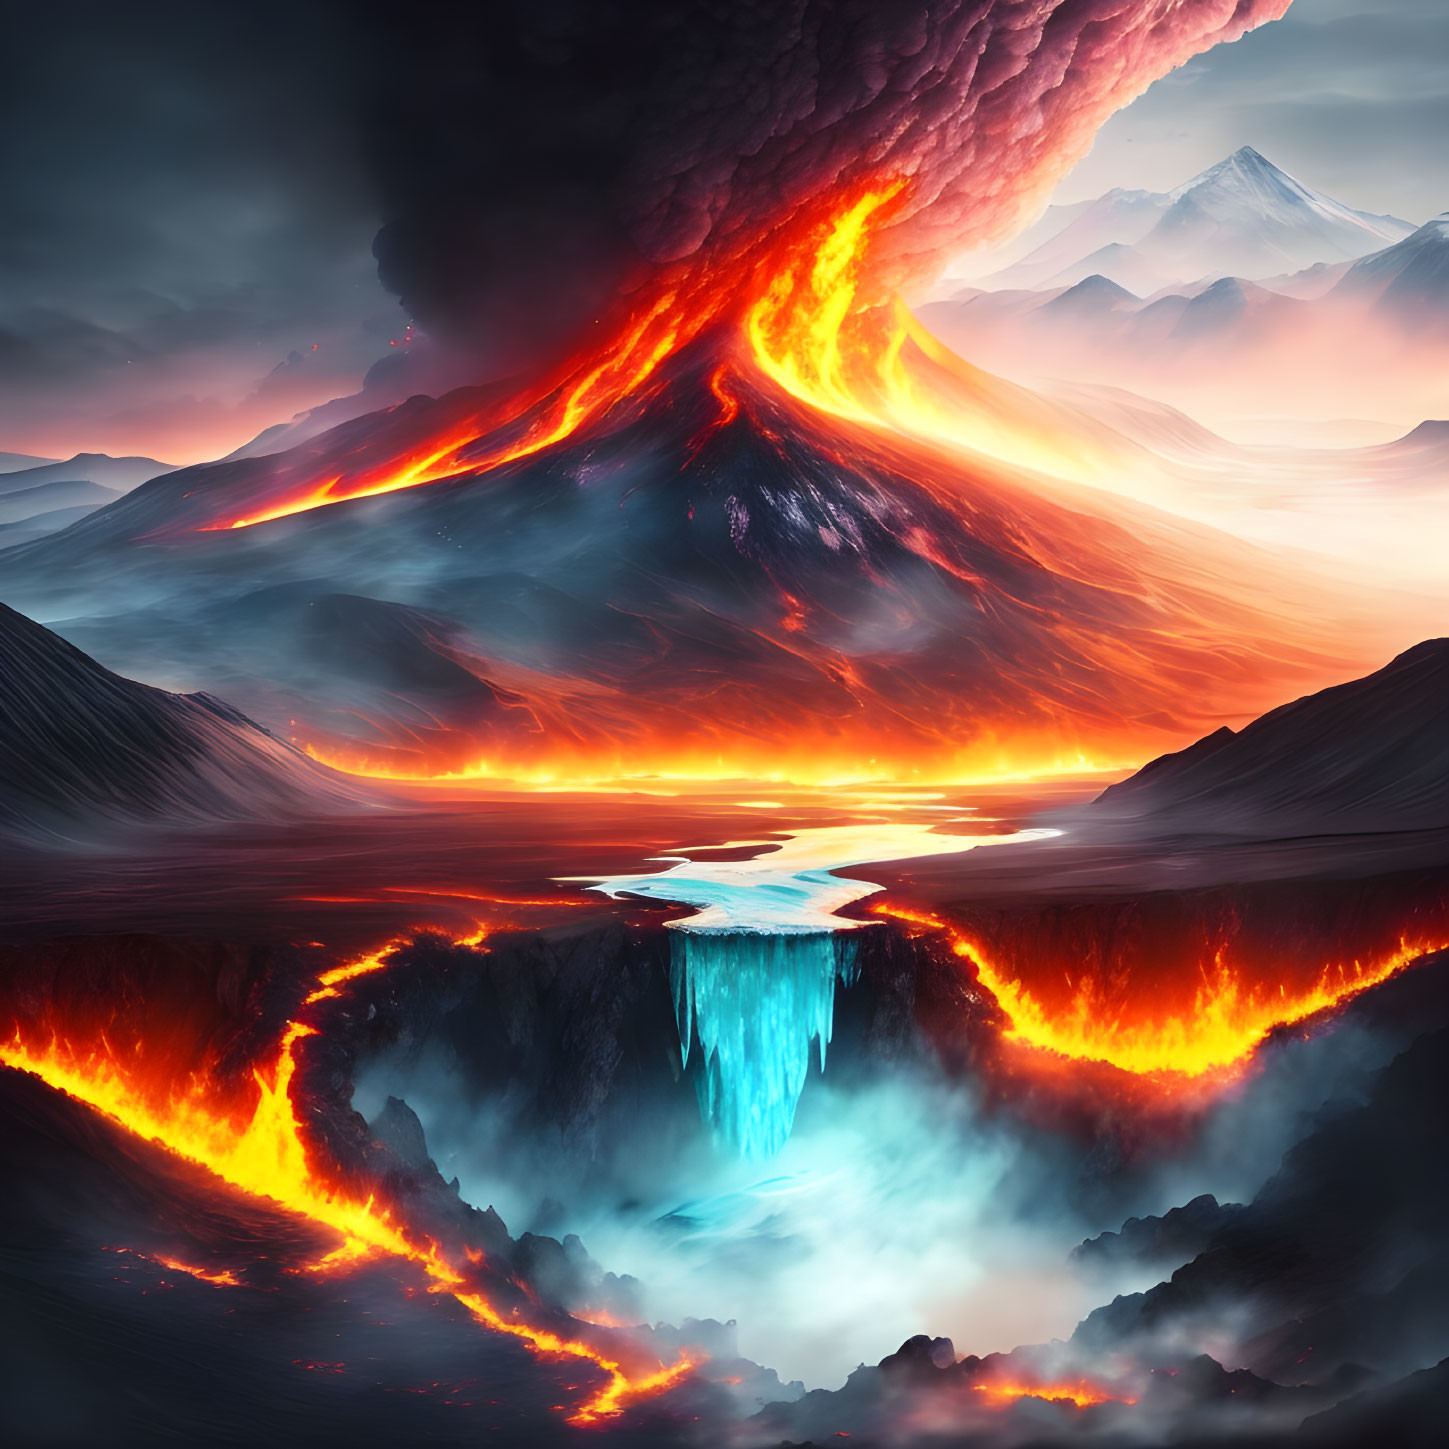 Erupting volcano with flowing lava meeting icy water under dramatic sky